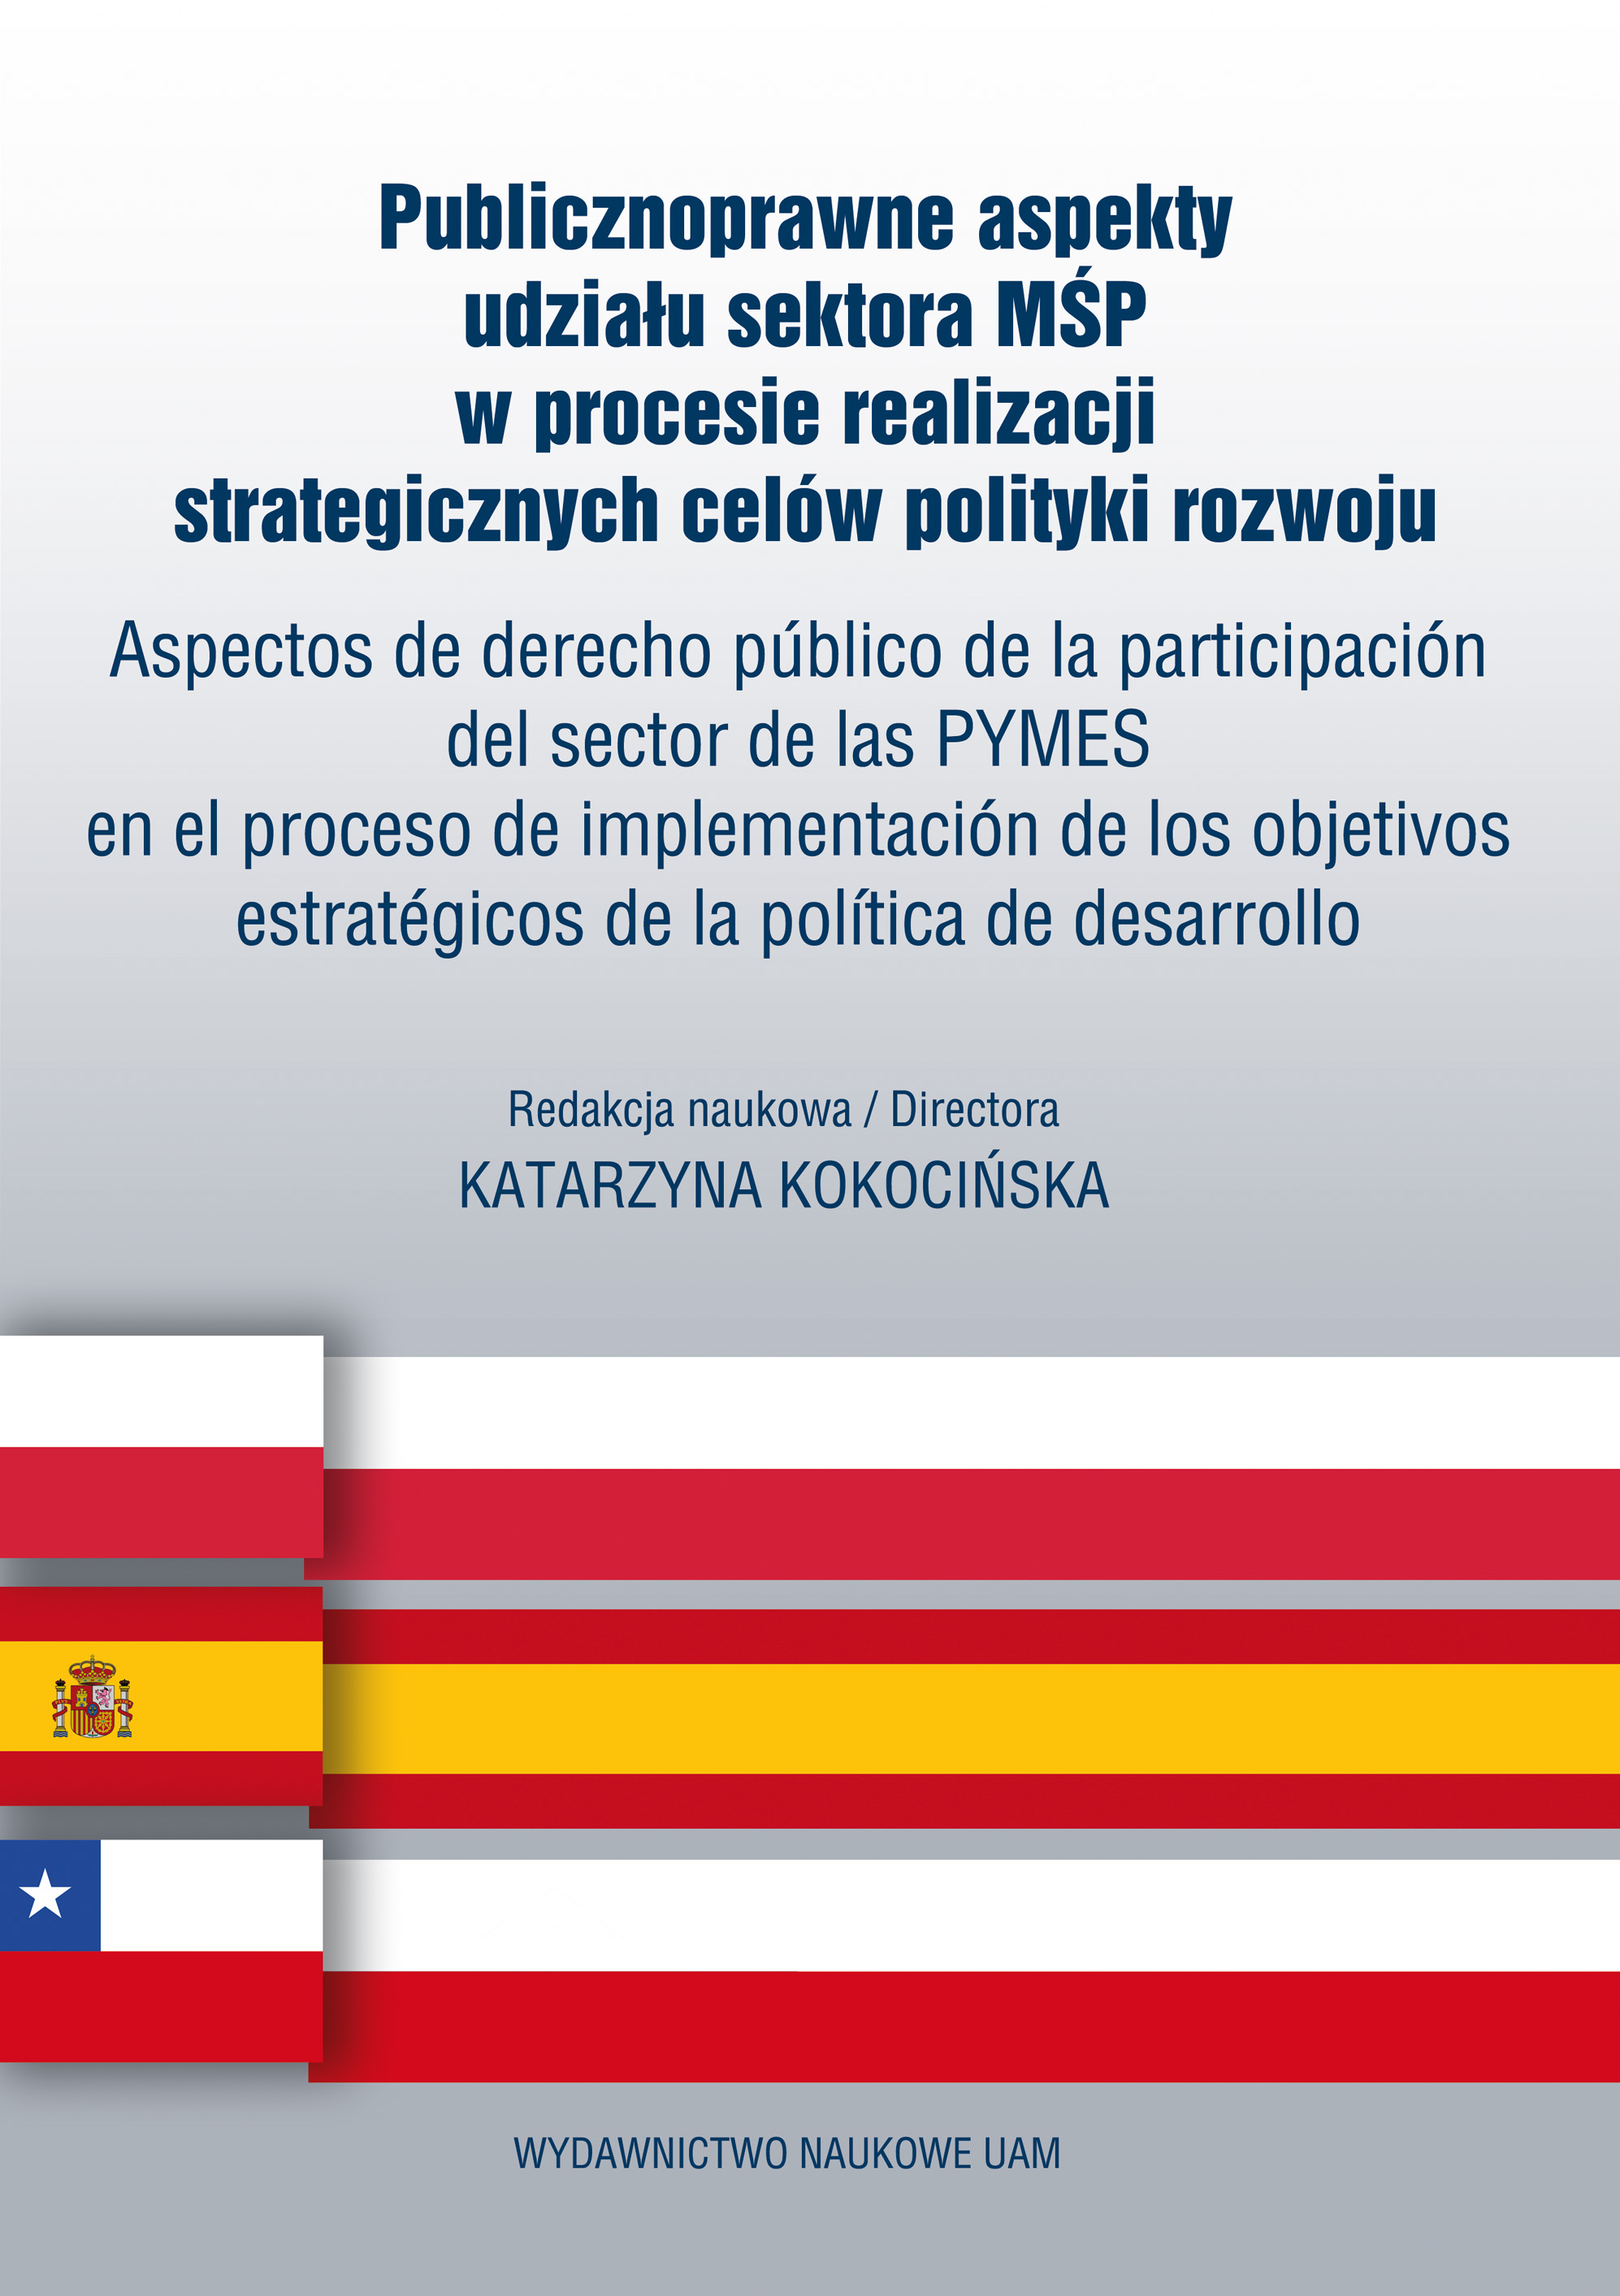 Public-law aspects of the participation of the SME sector in the process of achieving strategic goals of development policy Cover Image